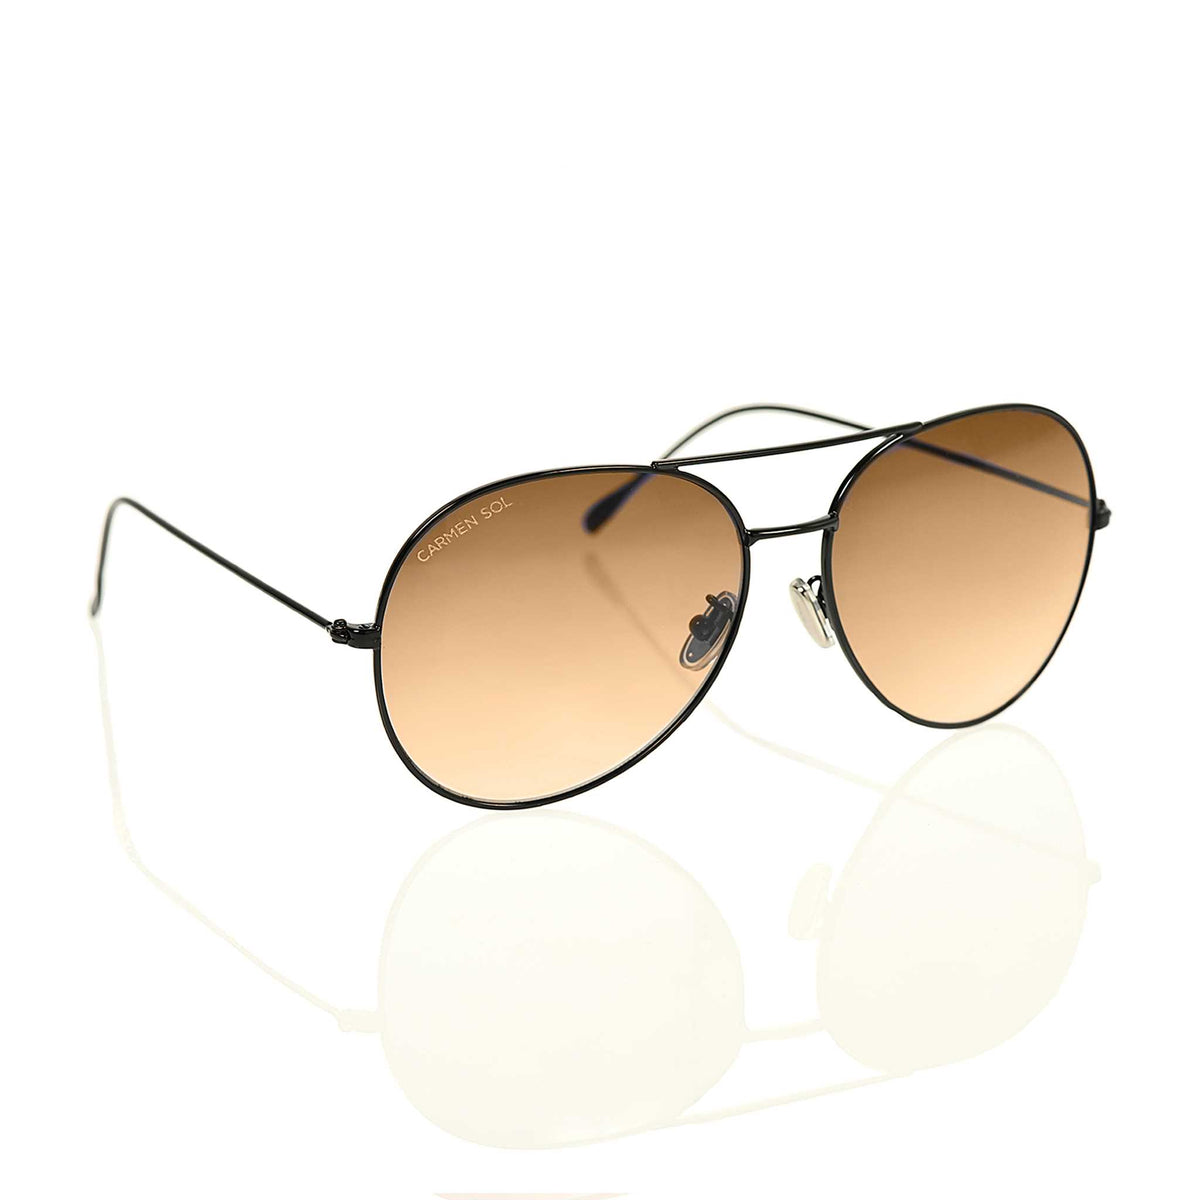 Brown sunglasses in metal and tone on tone gradient lenses